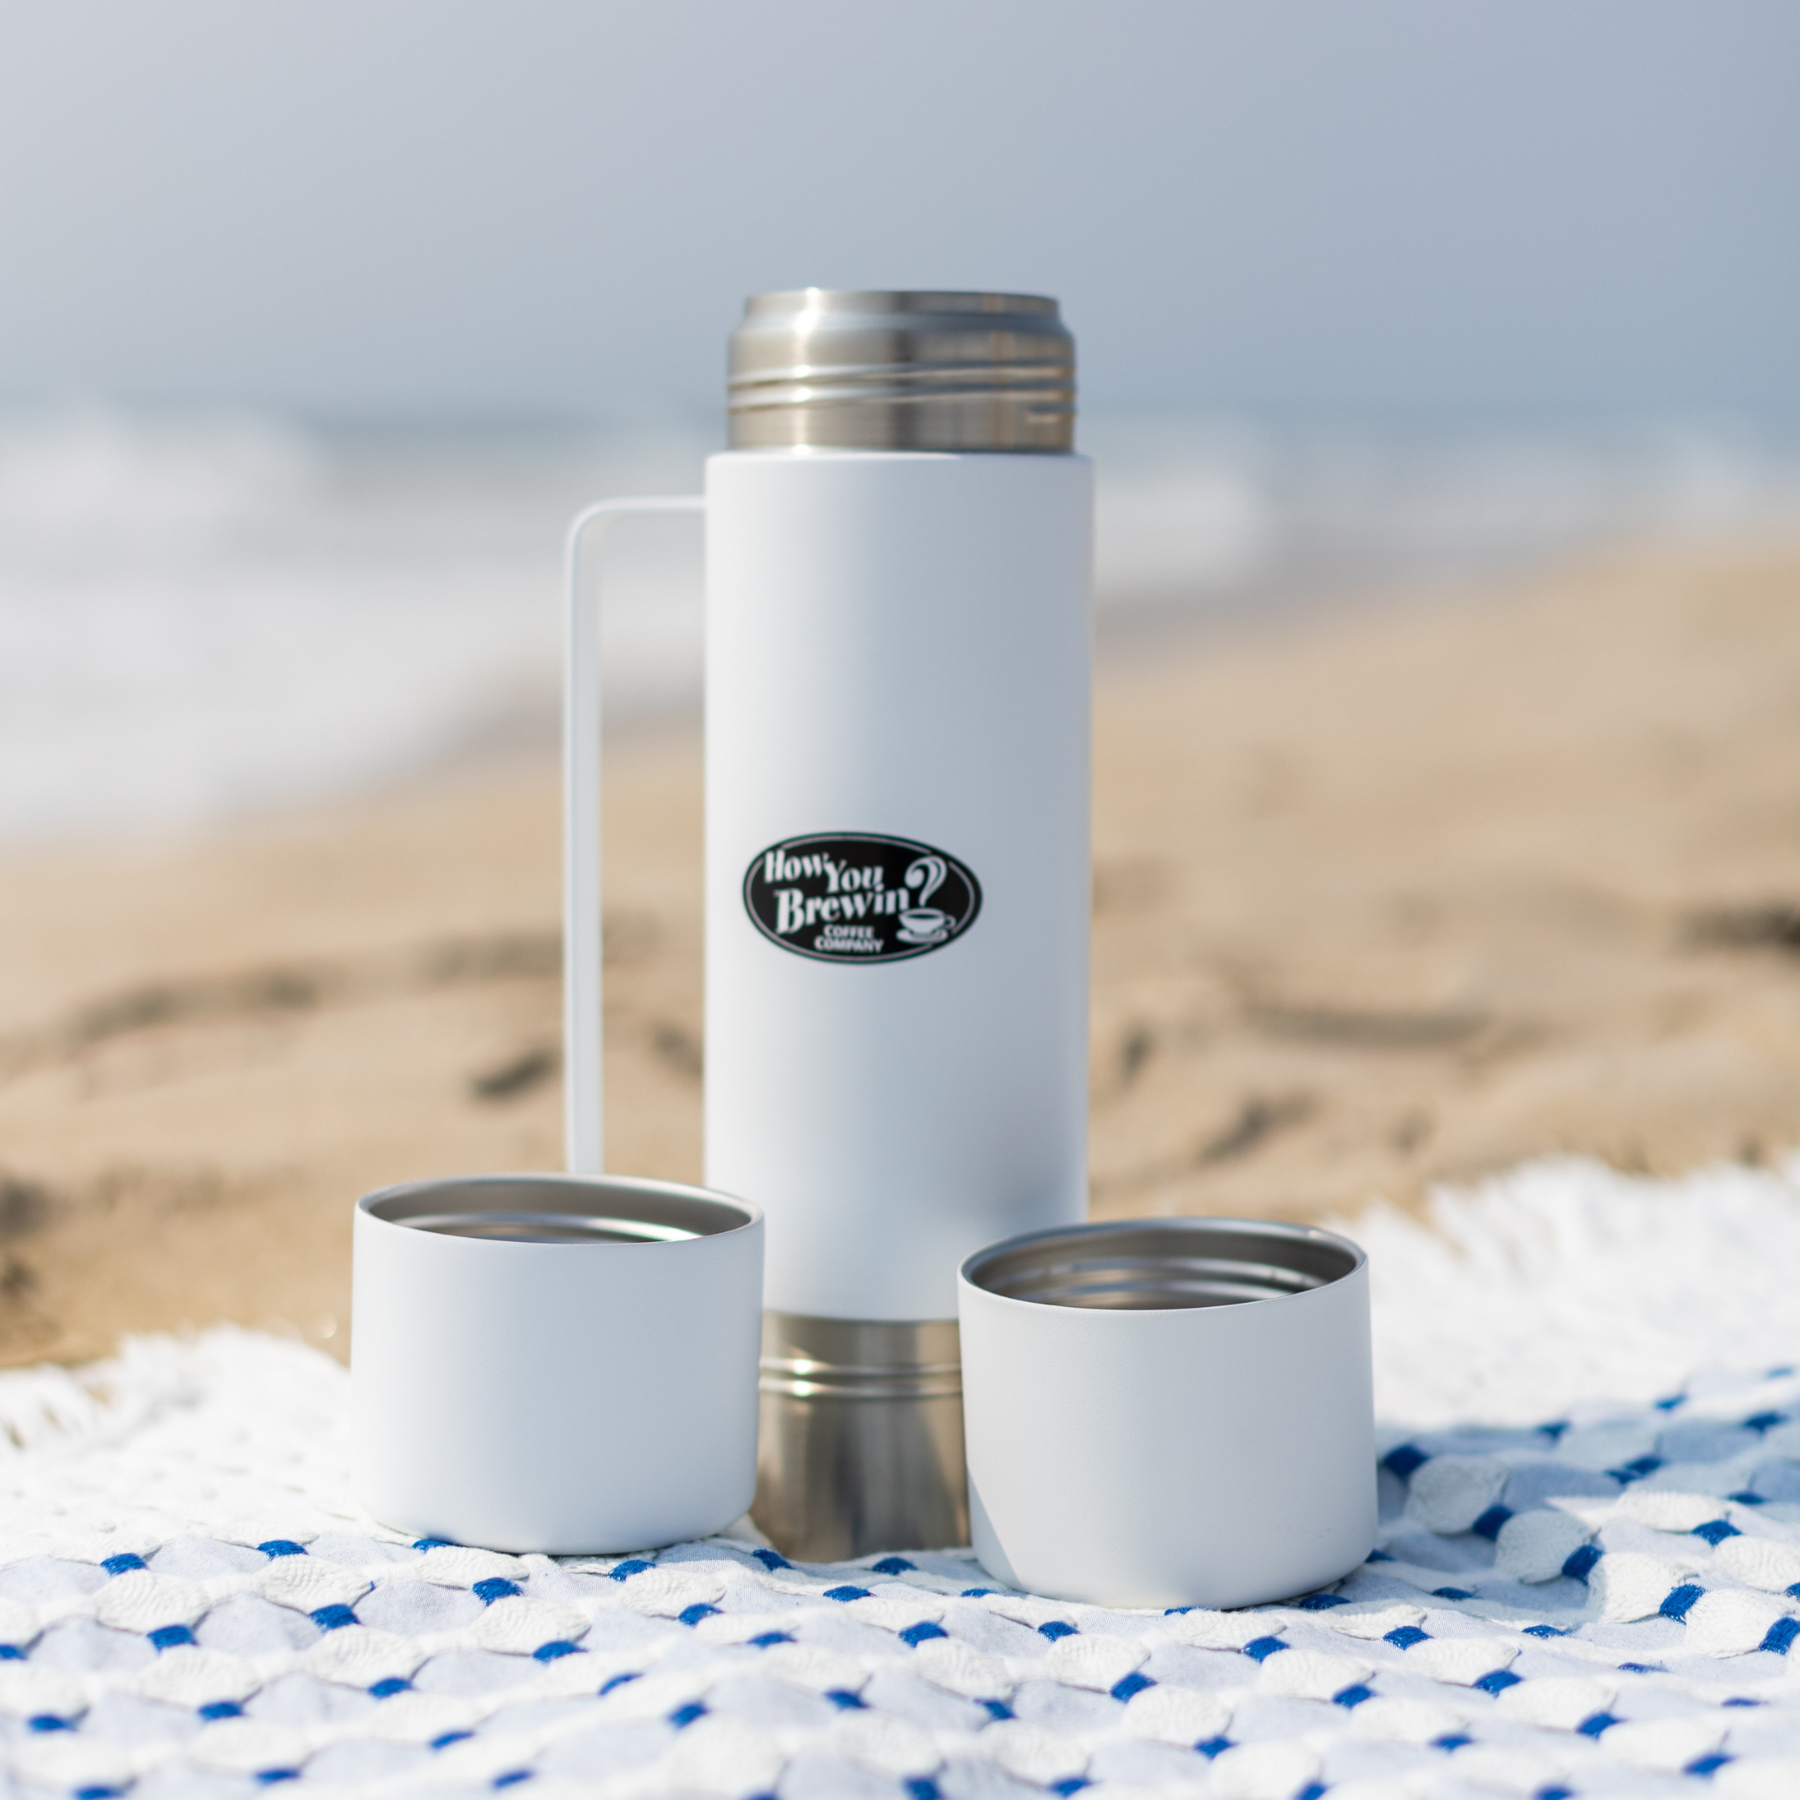 Thermos Cups 